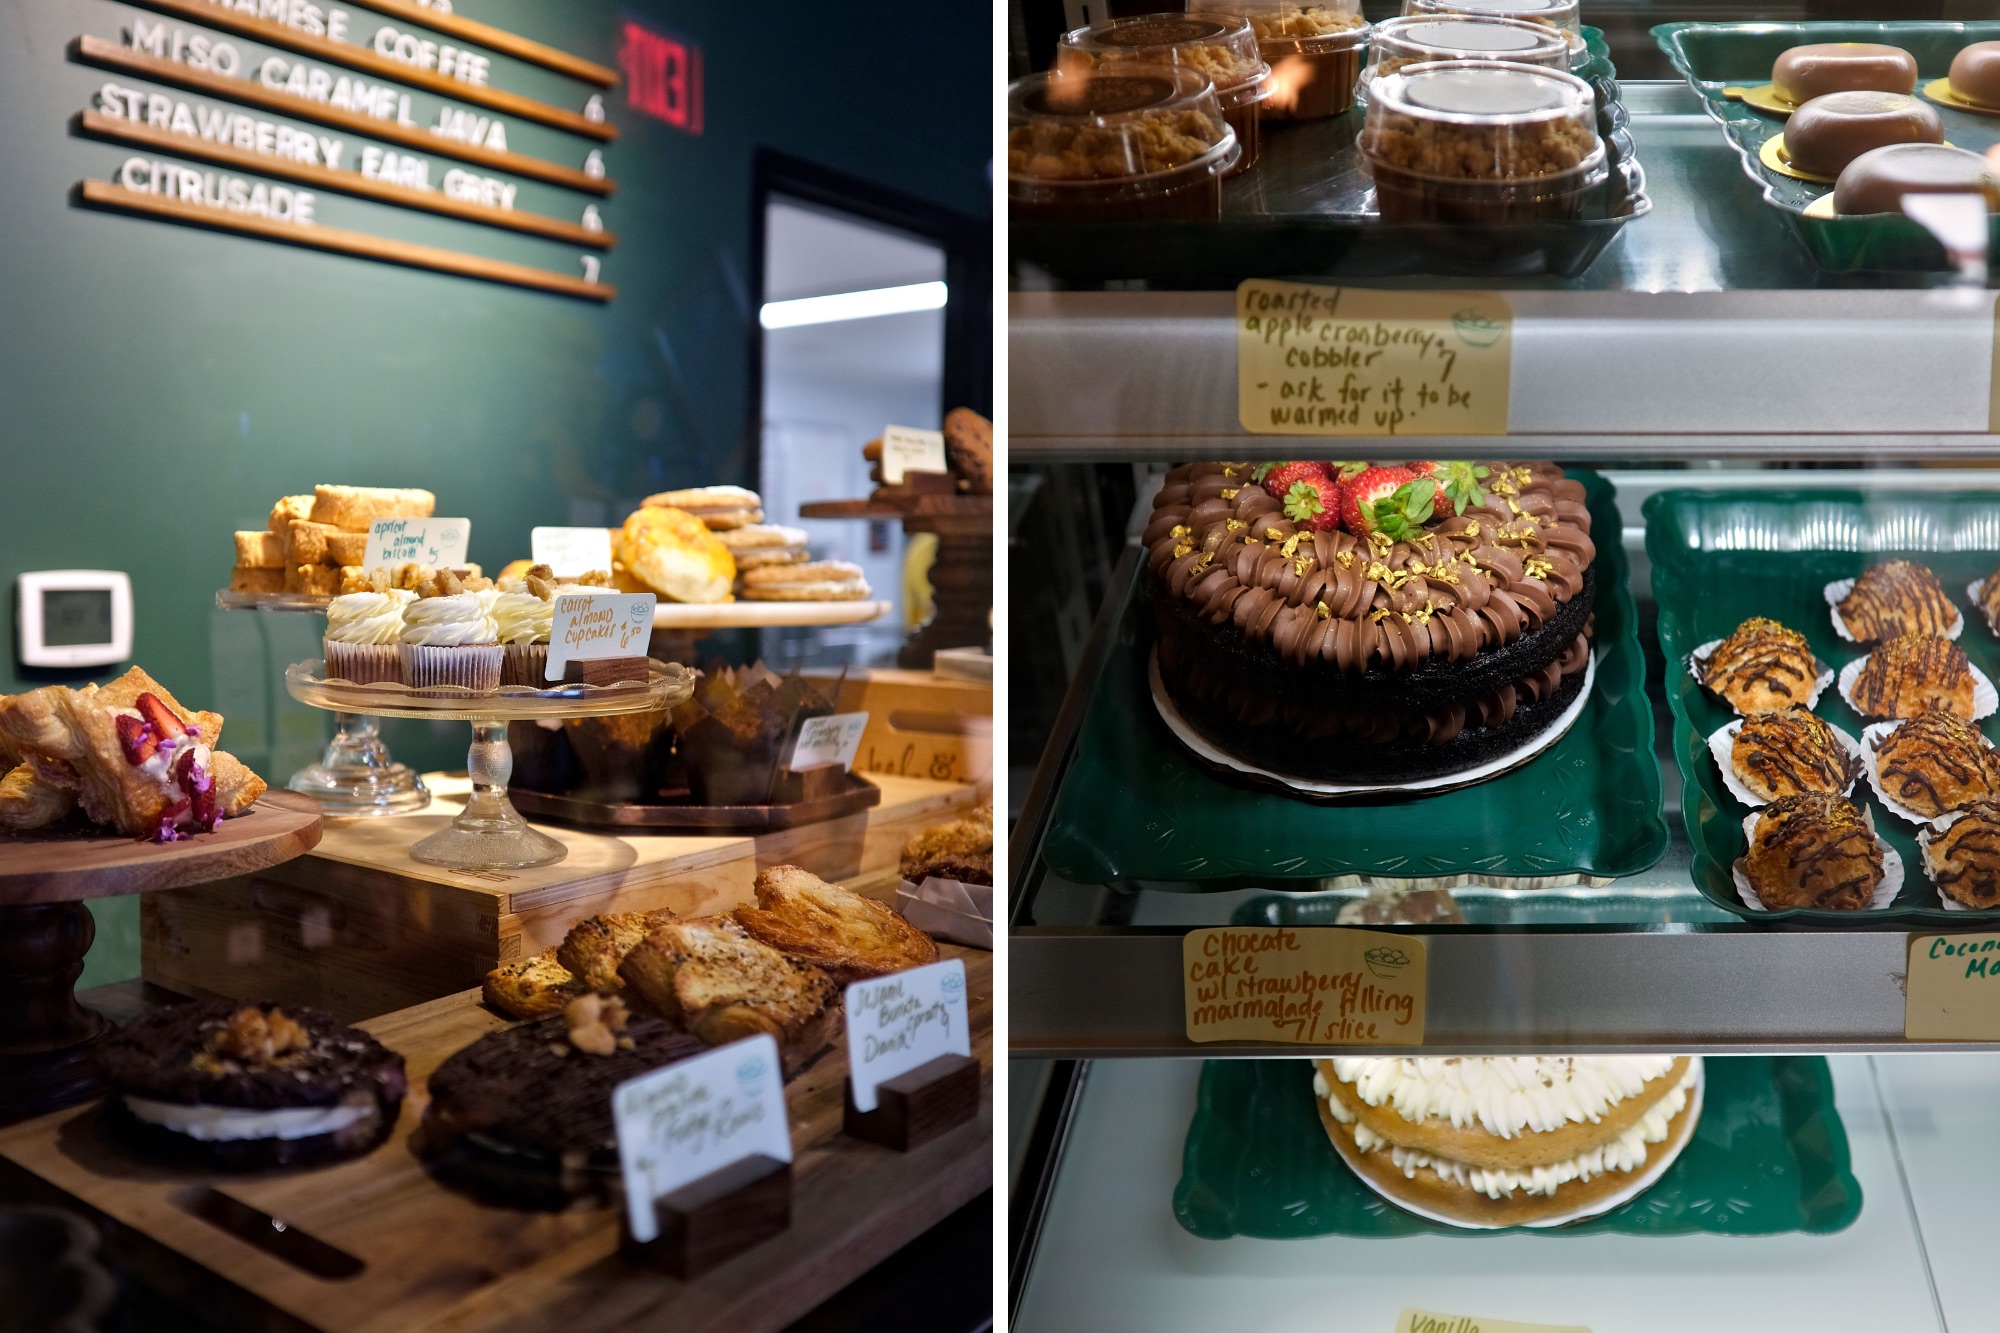 Two images of the pastry case at Wentworth & Fenn